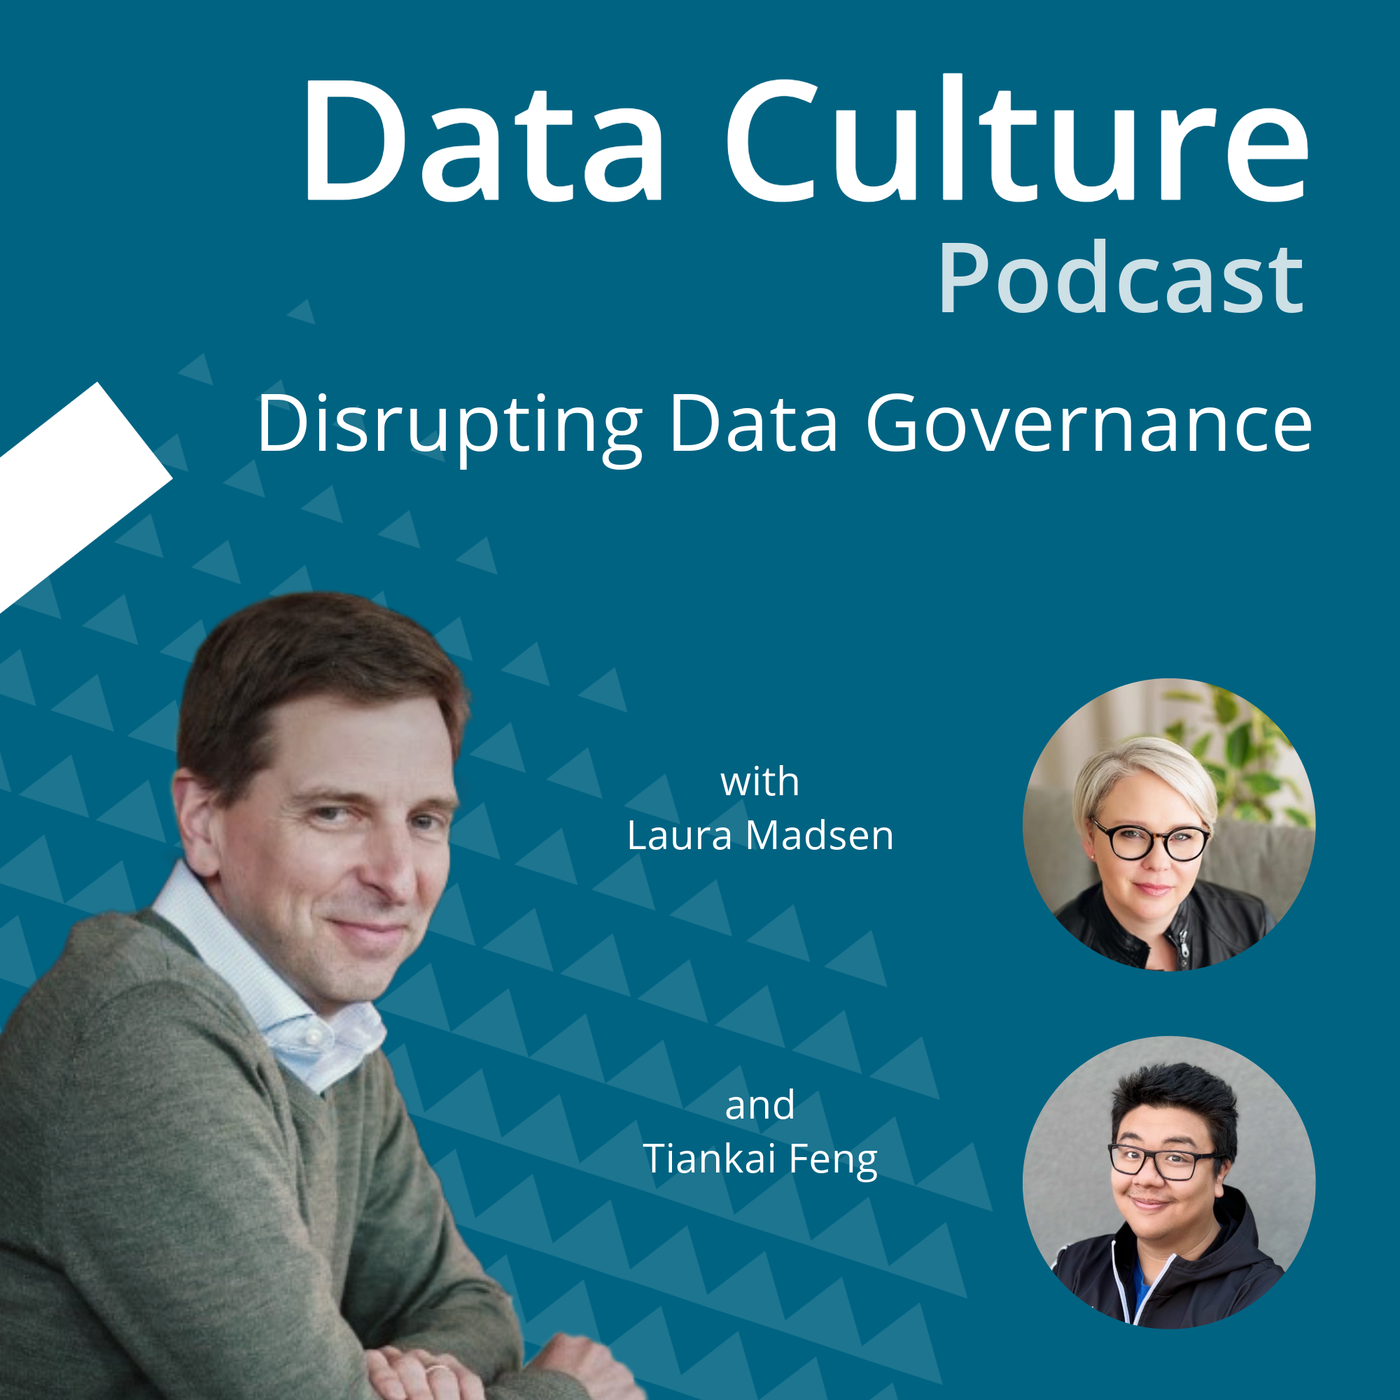 Disrupting Data Governance – with Laura Madsen and Tiankai Feng